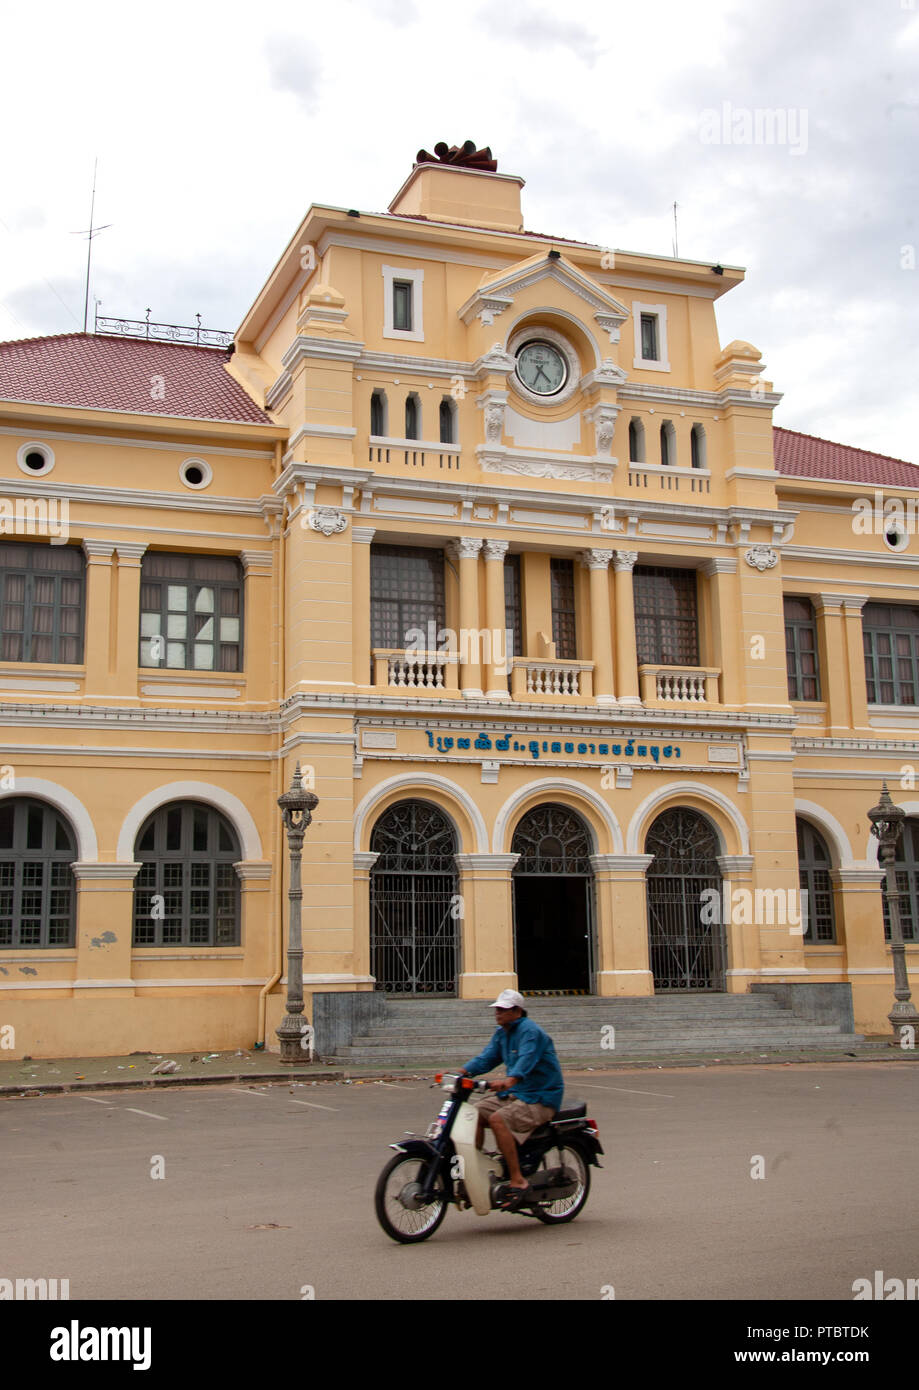 Cambodian man on a motorbike passing in front of the french-era post office, Phnom Penh province, Phnom Penh, Cambodia Stock Photo